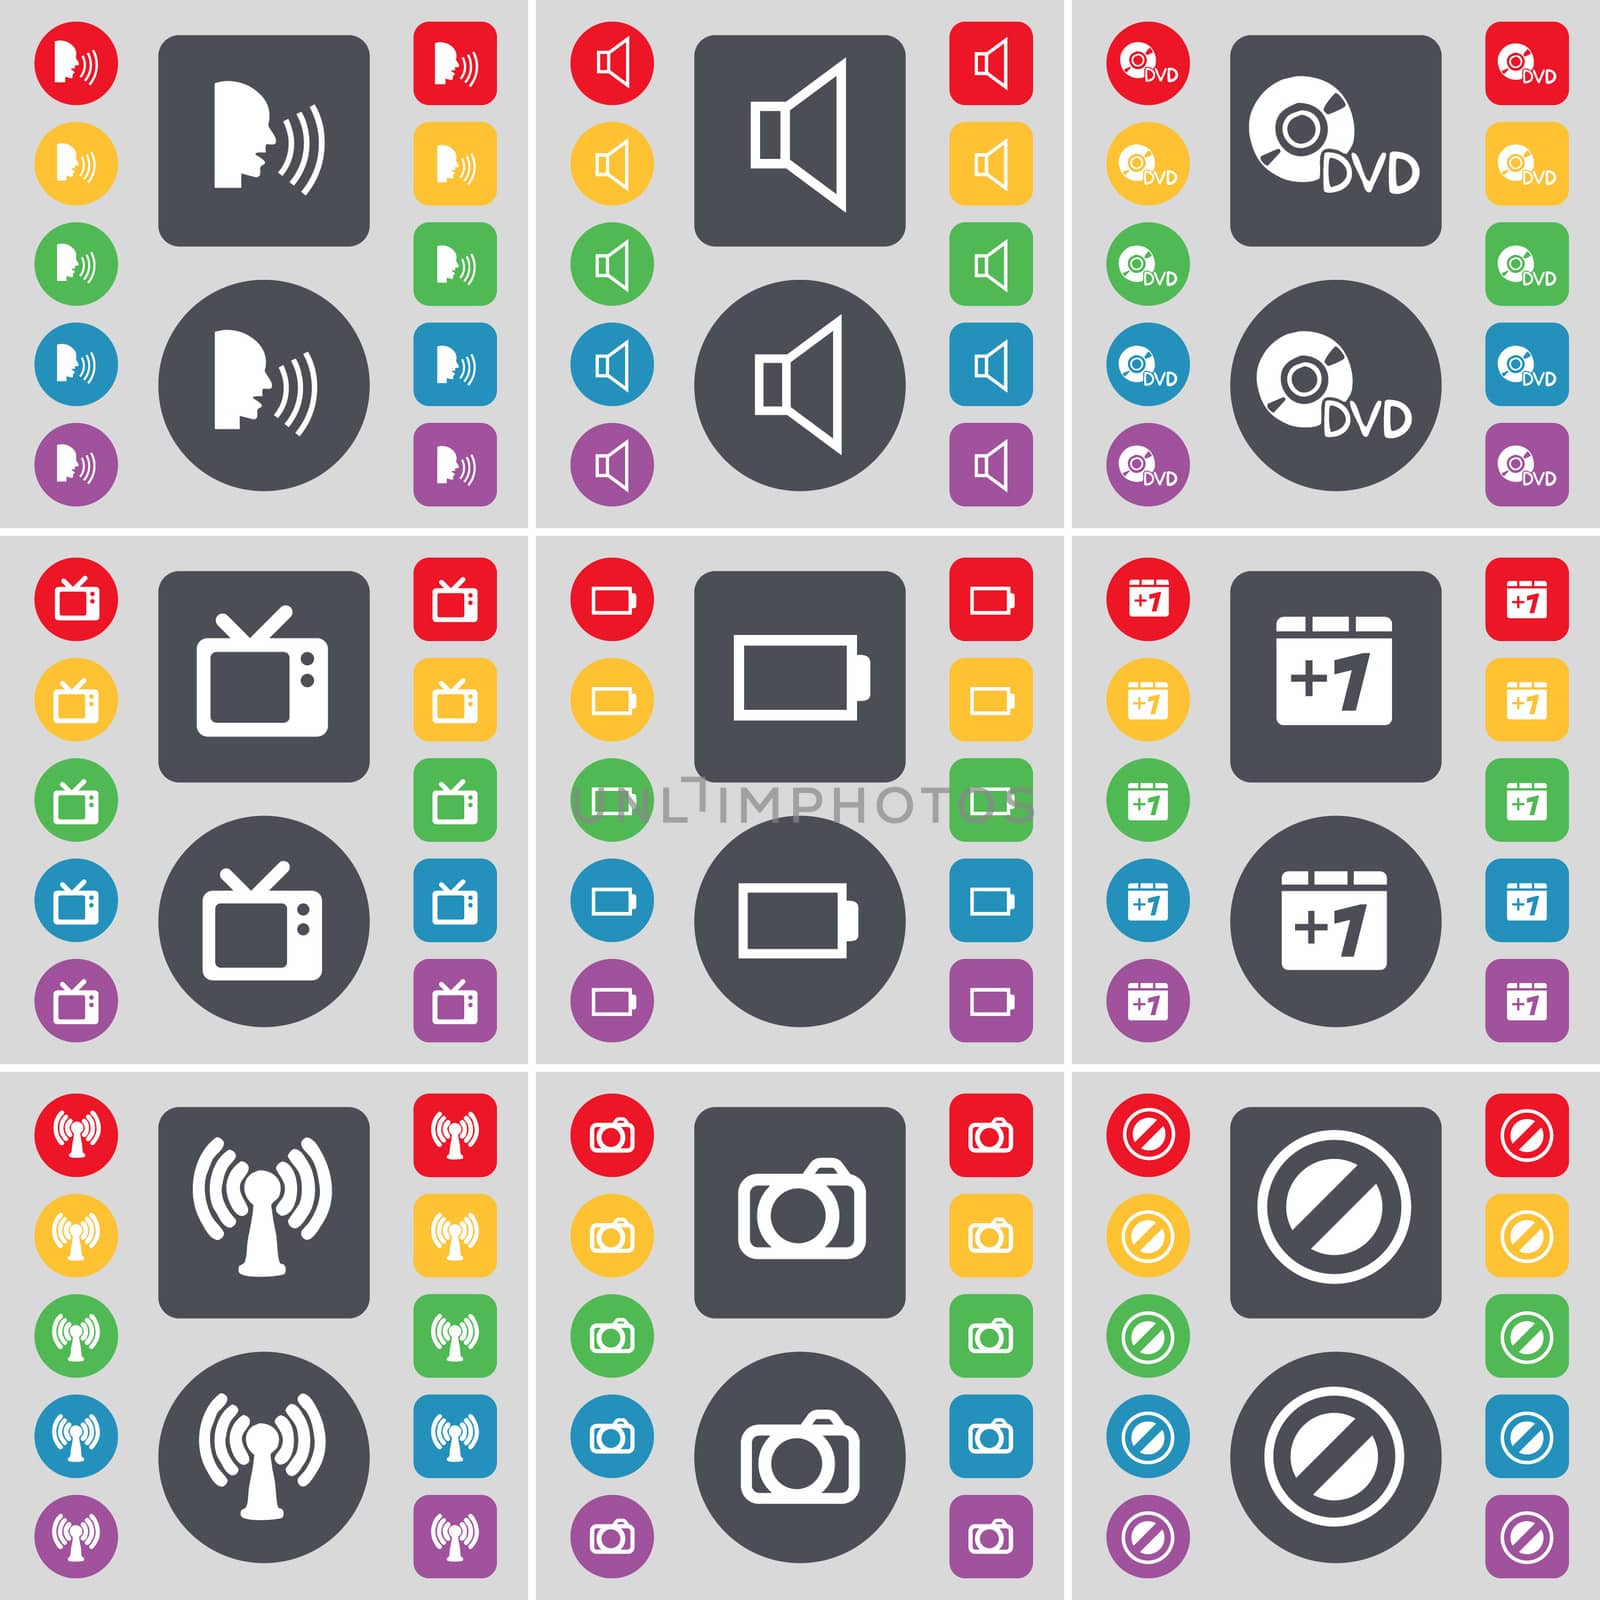 Talk, Sound, DVD, Retro TV, Battery, Plus one, Wi-Fi, Camera, Stop icon symbol. A large set of flat, colored buttons for your design. illustration